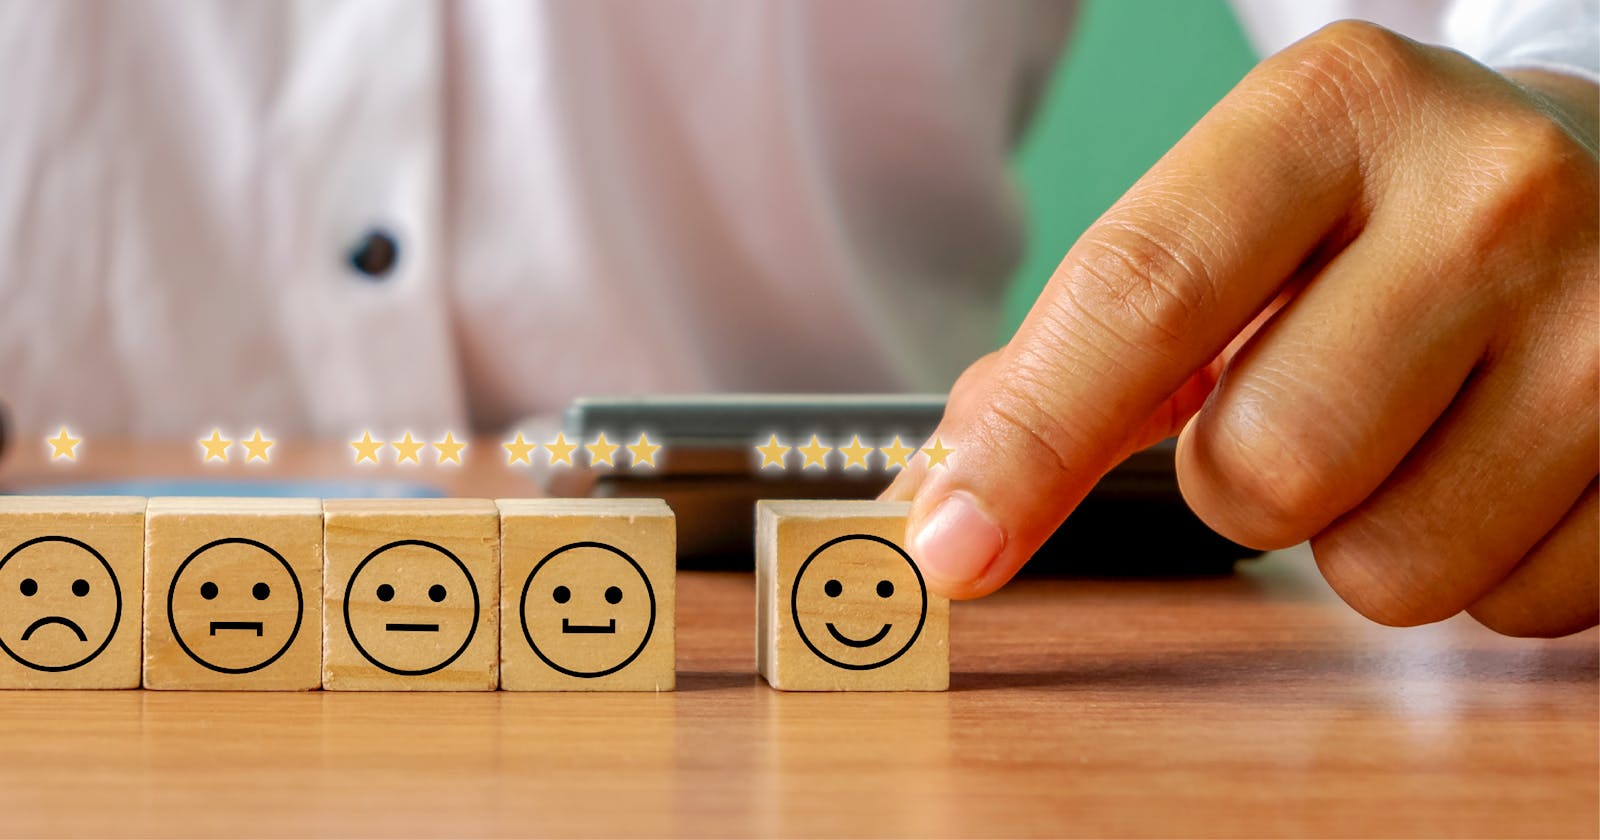 Role of Sentiment Analysis in Elevating Net Promoter Score